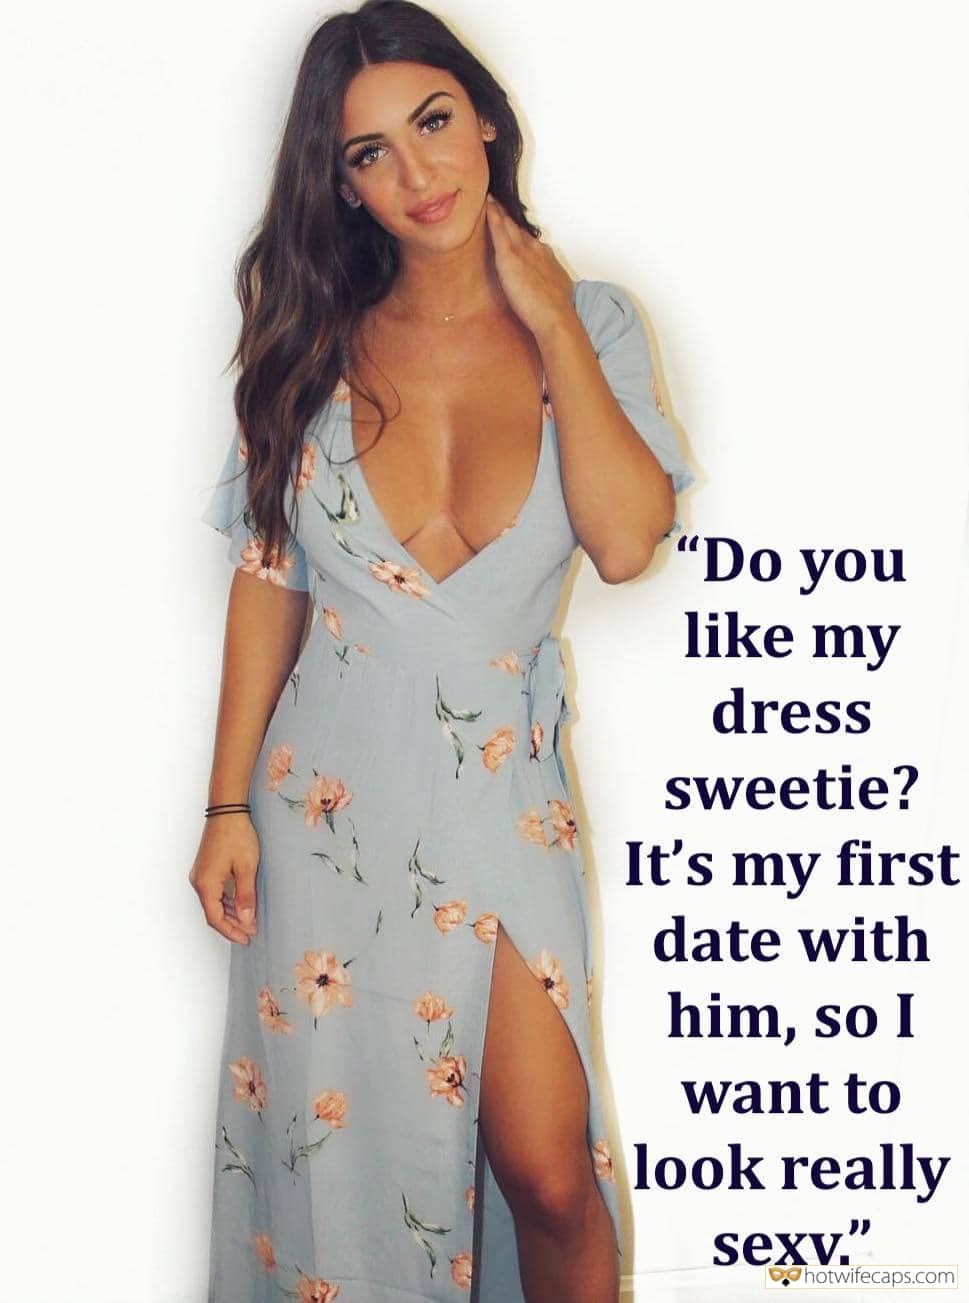 Sexy Memes hotwife caption: “Do you like my dress sweetie? It’s my first date with him, so I want to look really sexy.” Hotwife Looks Elegant for Her First Date